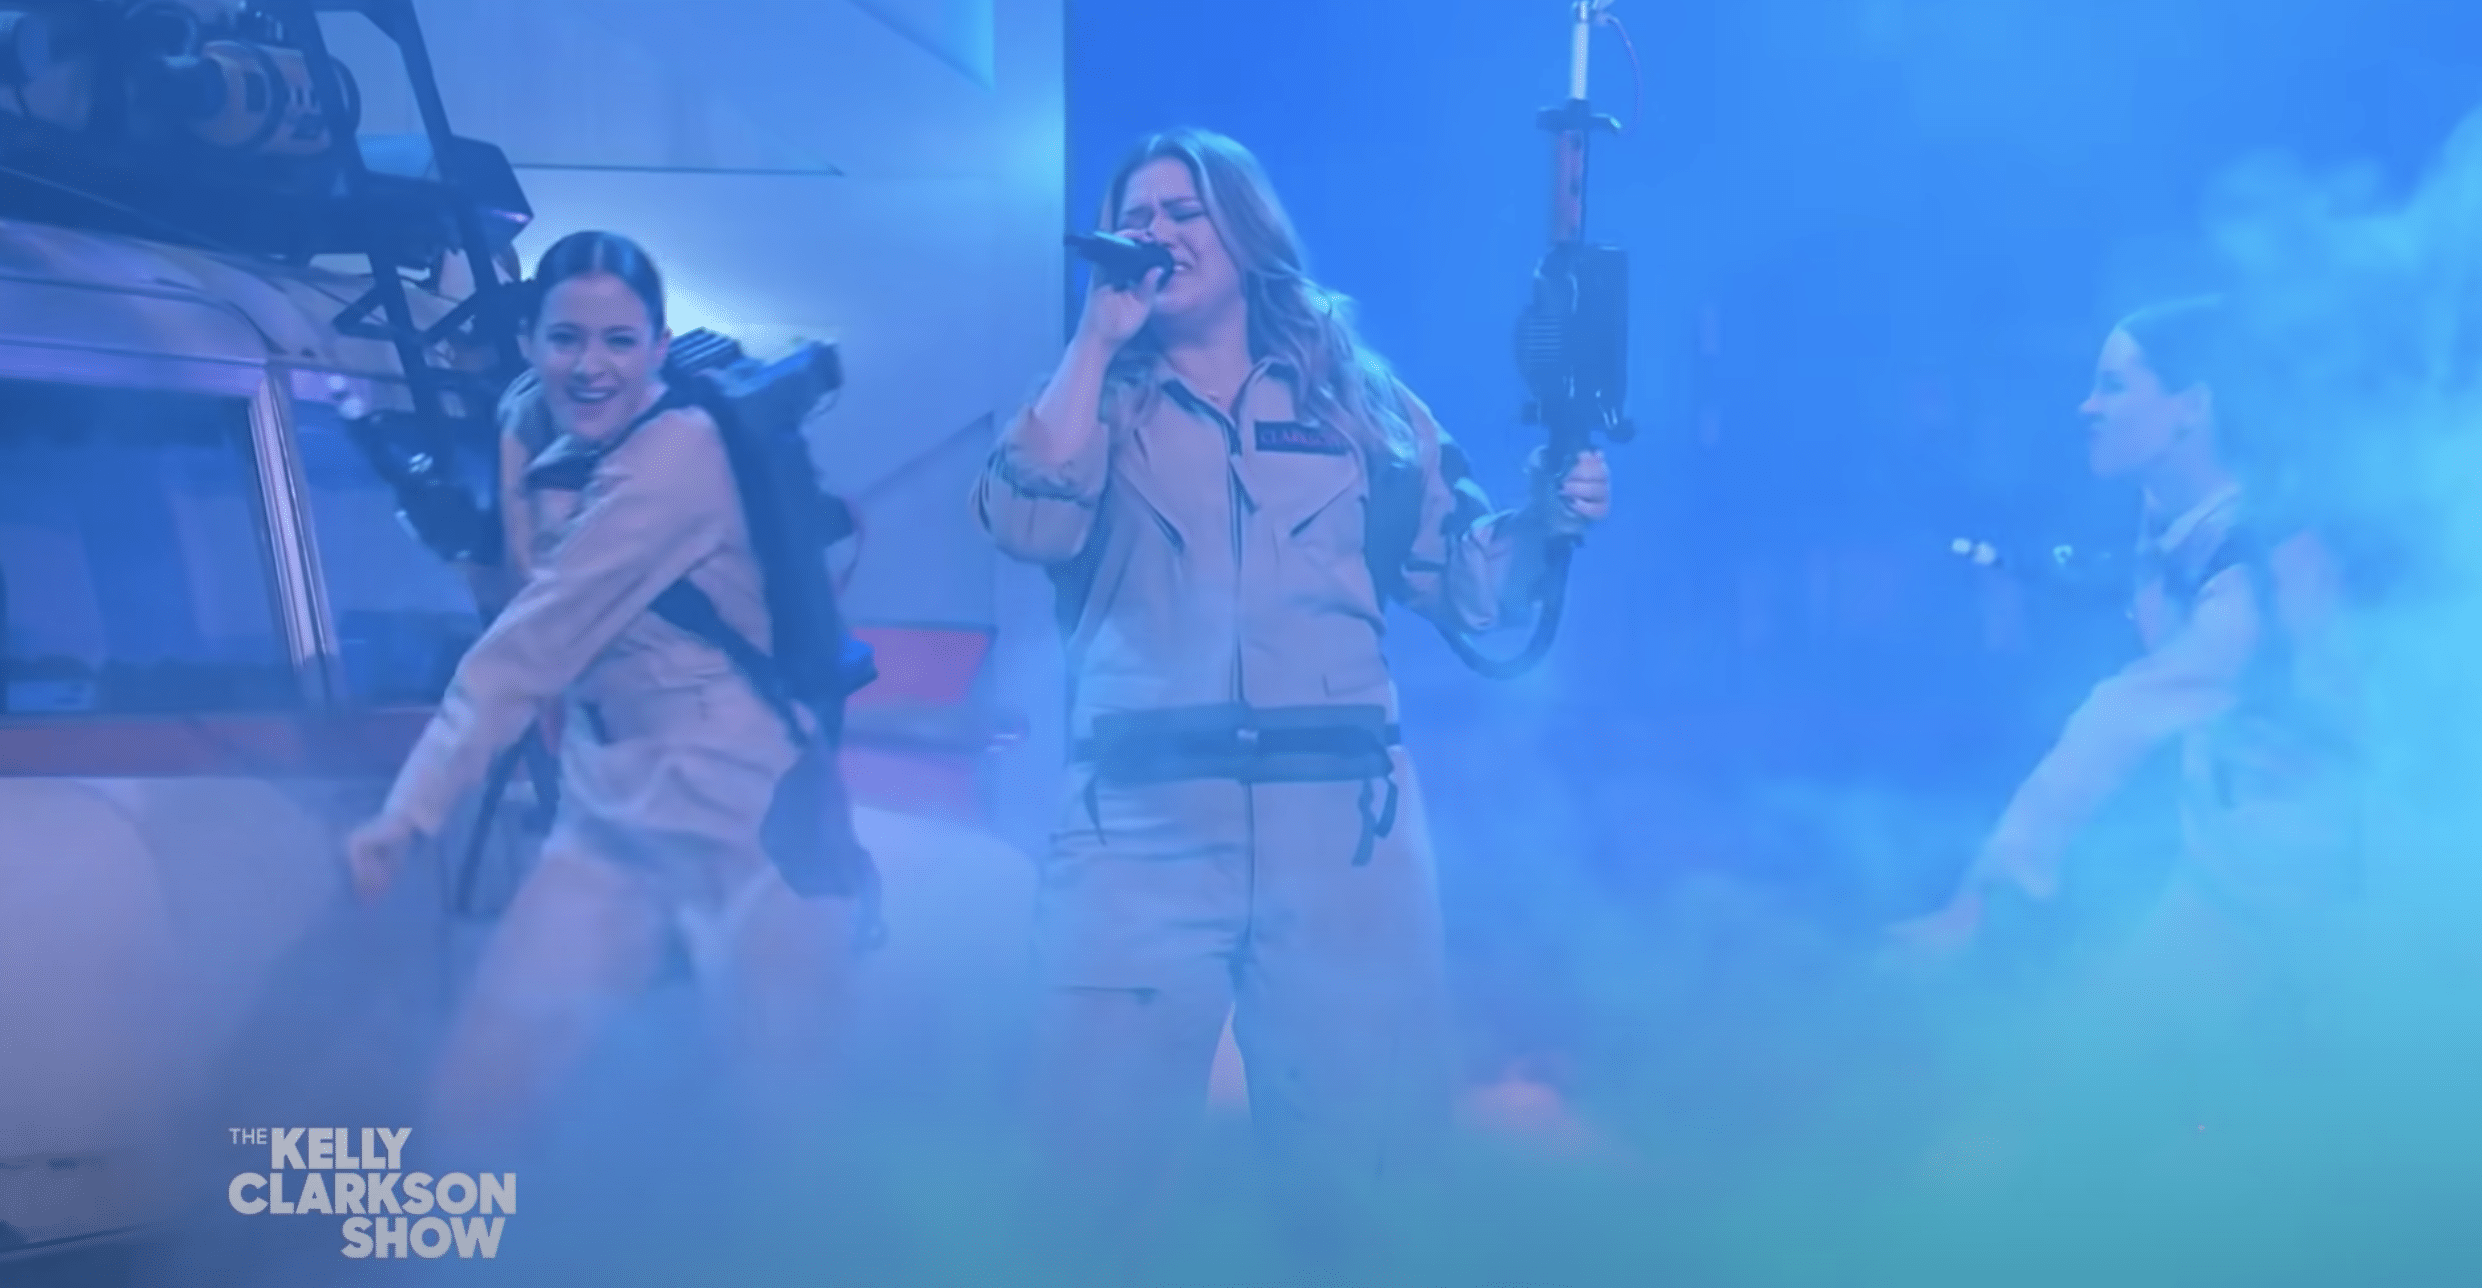 Kelly Clarkson performs classic 'Ghostbusters' hit